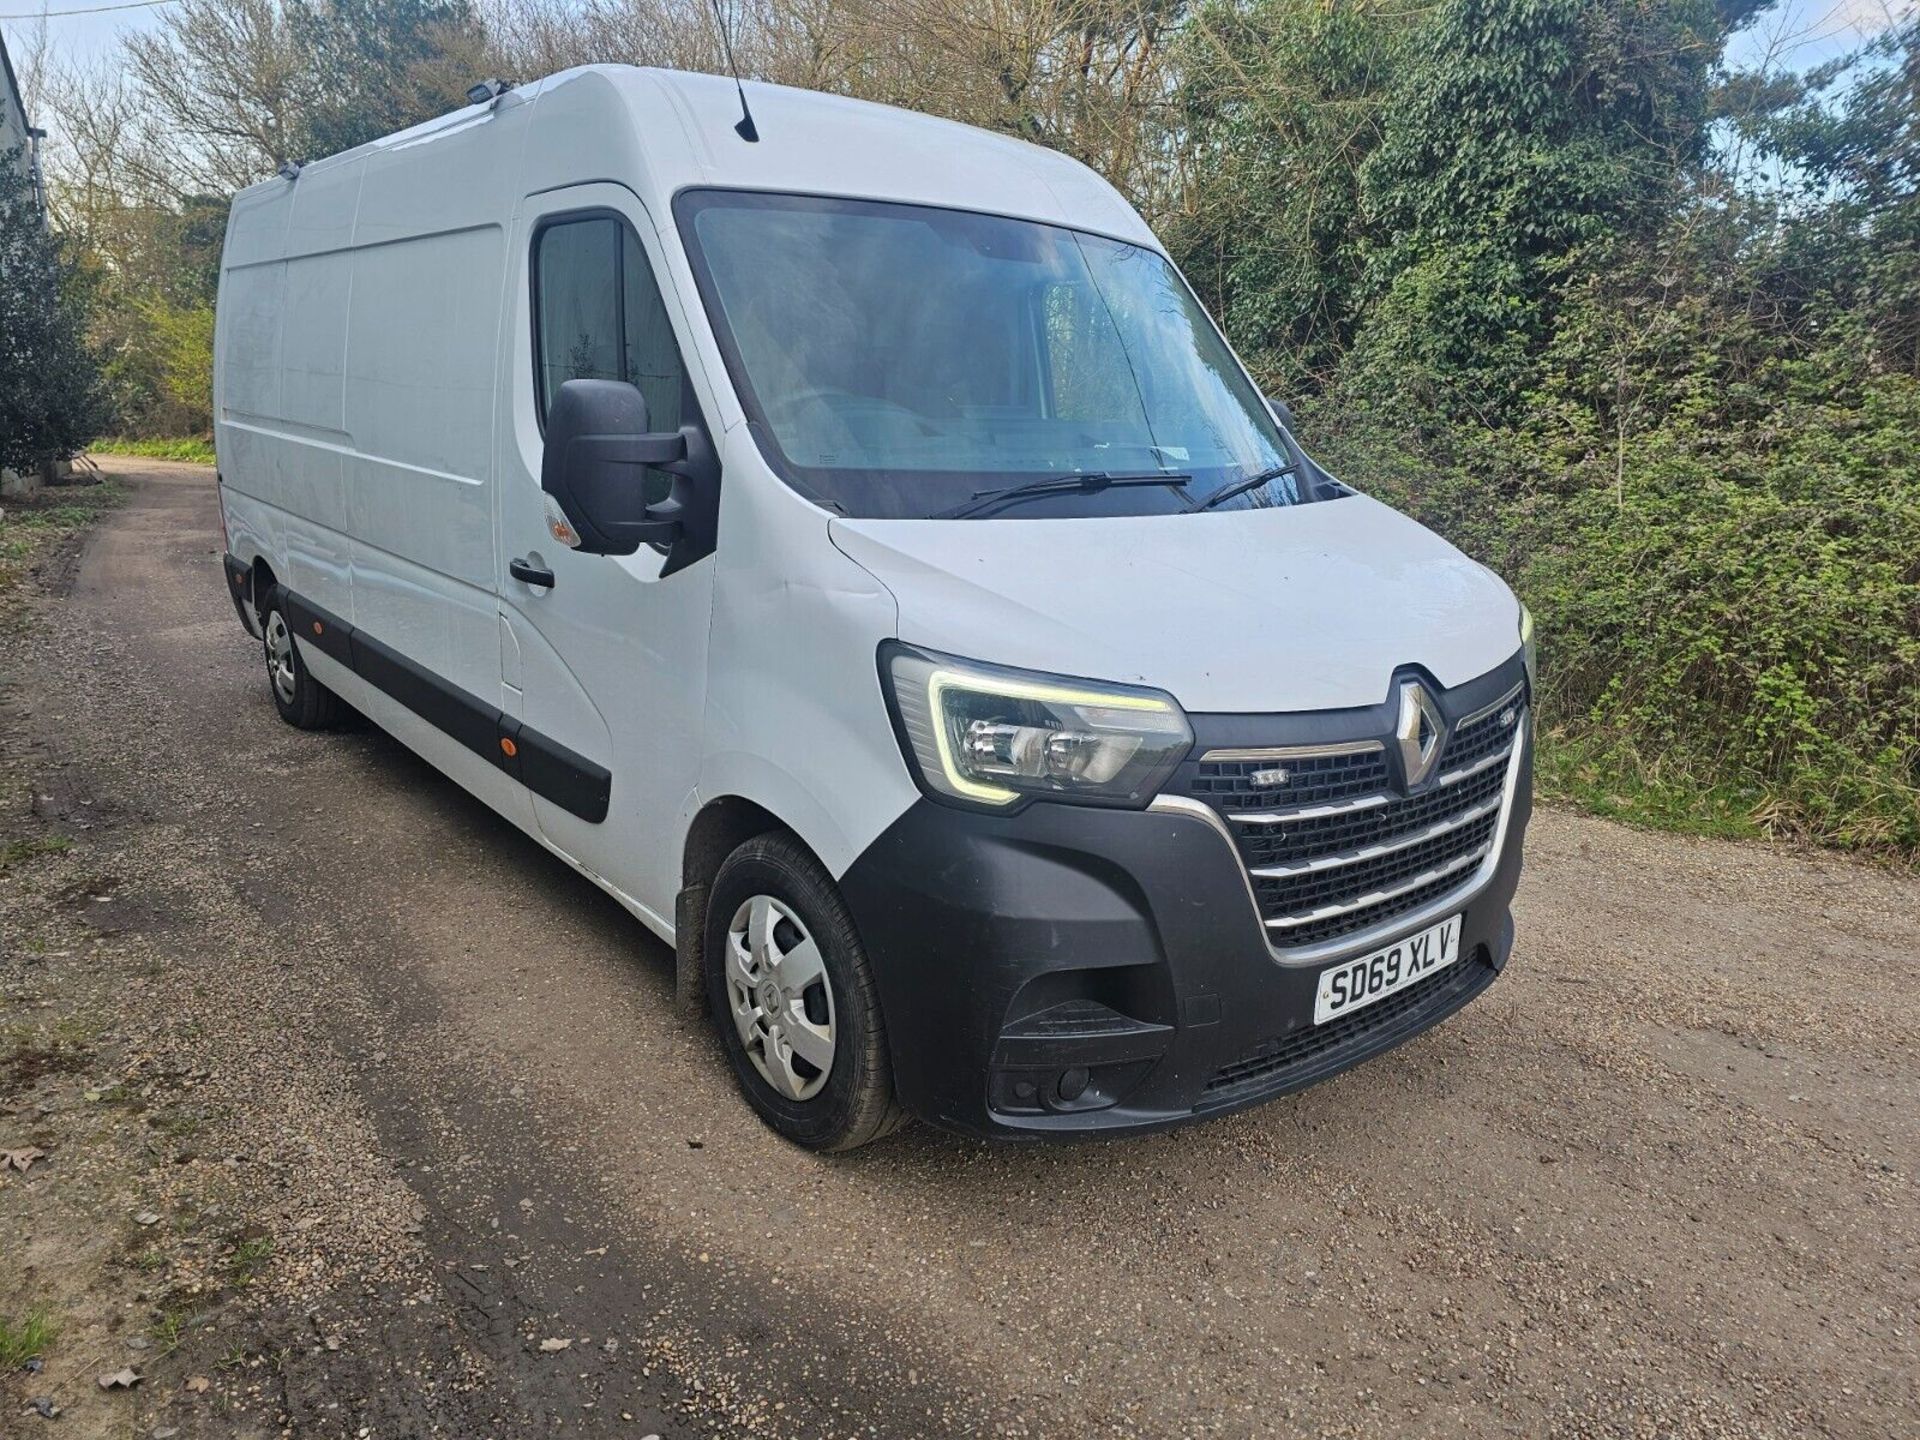 2019 RENAULT MASTER BUSINESS PLUS, FULLY LOADED